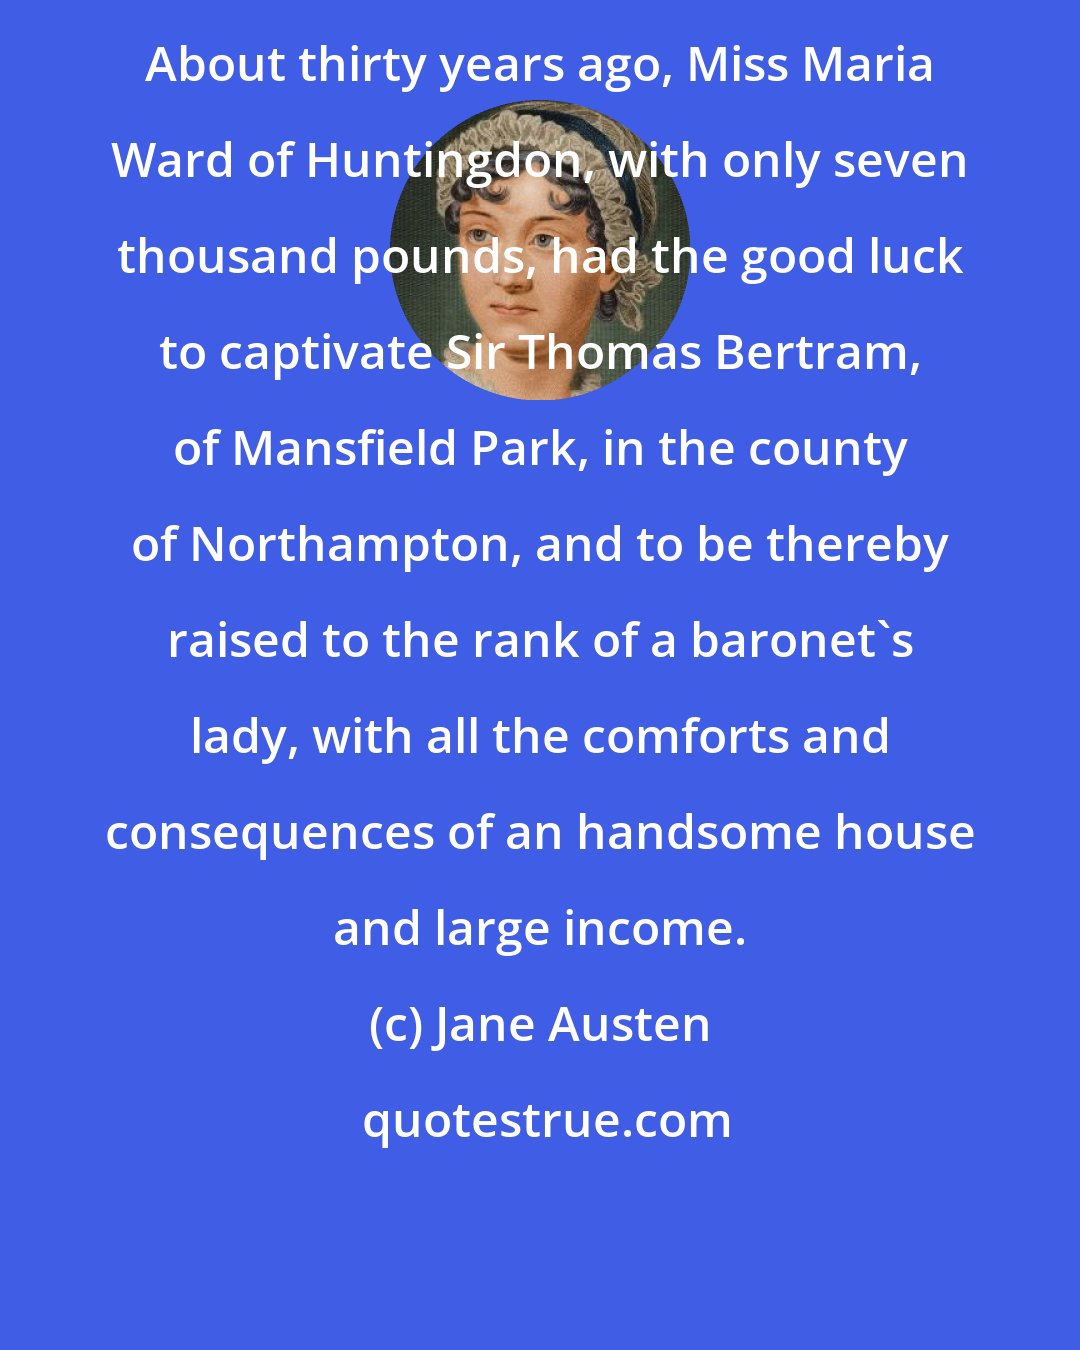 Jane Austen: About thirty years ago, Miss Maria Ward of Huntingdon, with only seven thousand pounds, had the good luck to captivate Sir Thomas Bertram, of Mansfield Park, in the county of Northampton, and to be thereby raised to the rank of a baronet's lady, with all the comforts and consequences of an handsome house and large income.